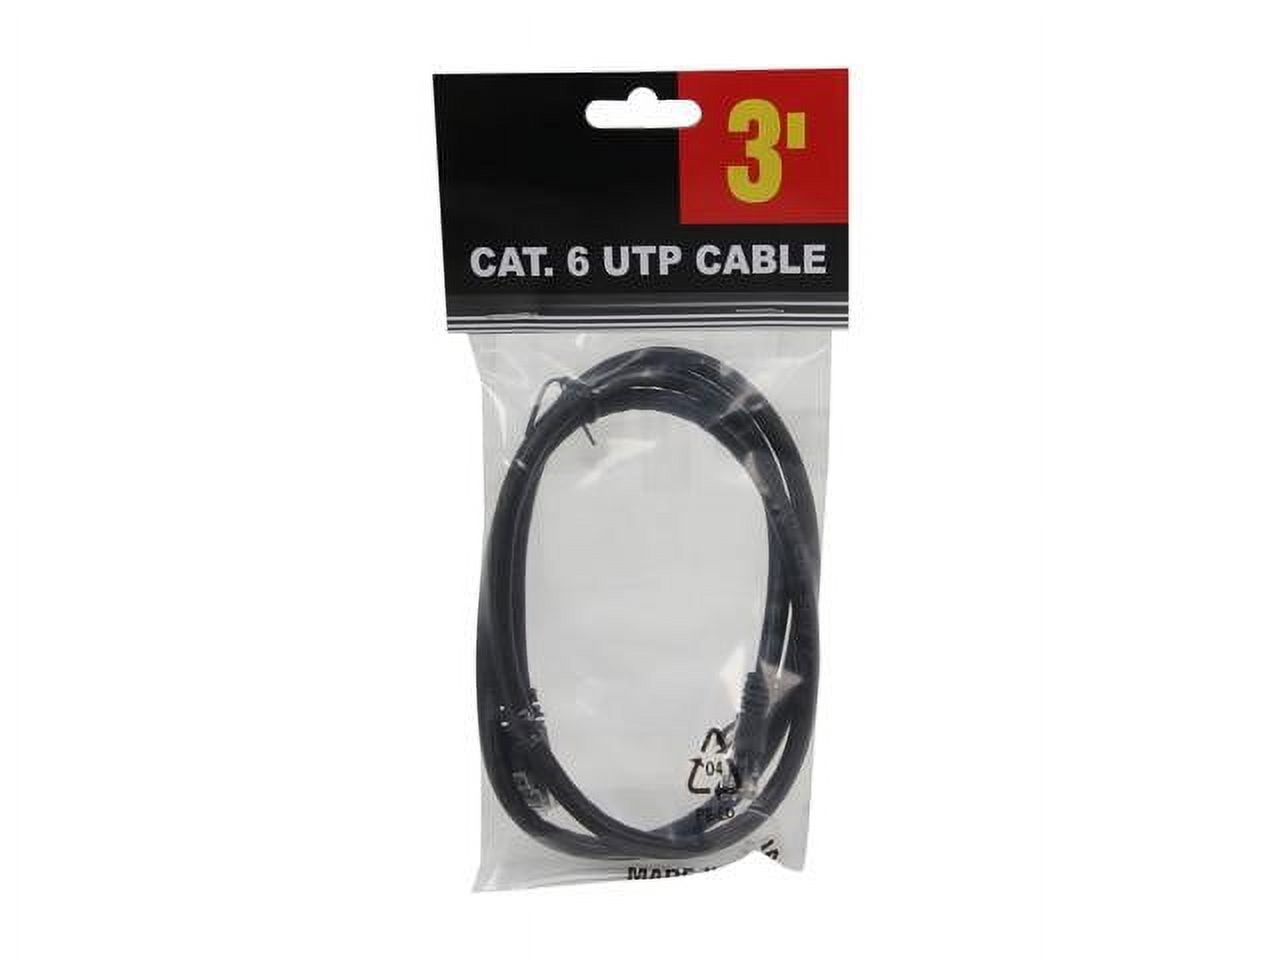 Link Depot Cat.6e UTP Cable - image 2 of 2